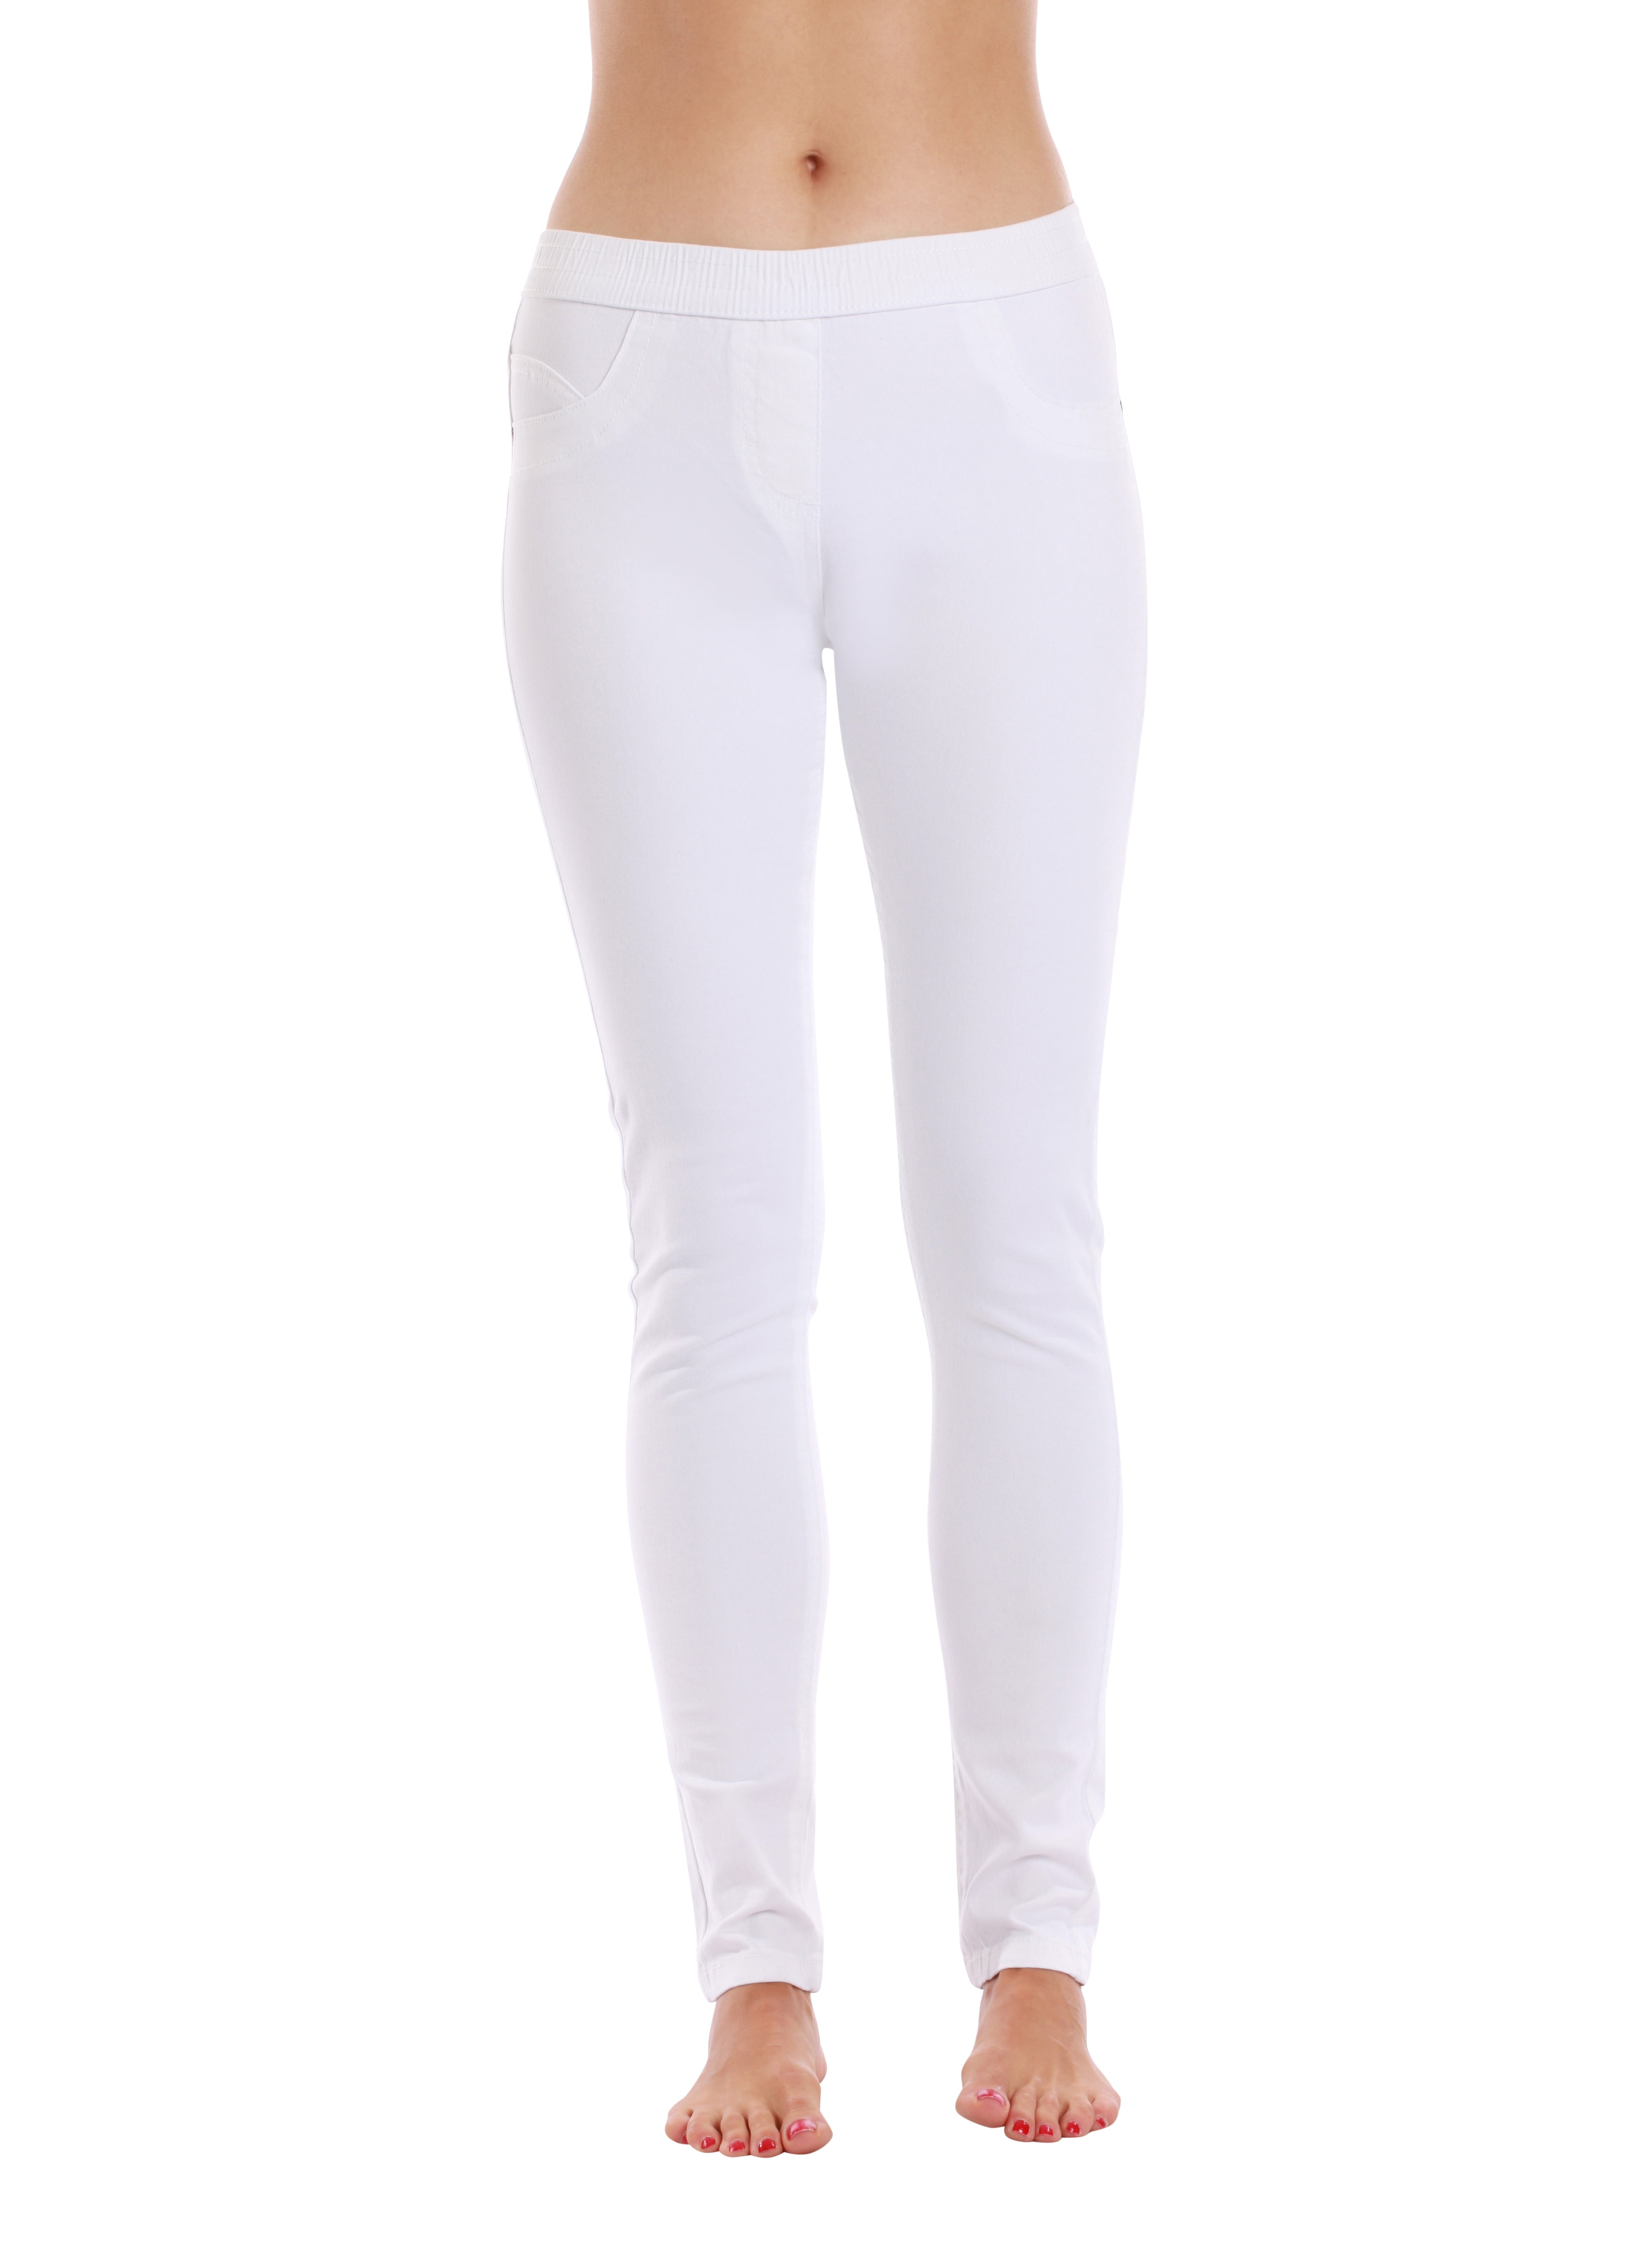 Just Love Solid Jeggings for Women (Light Blue, Small)